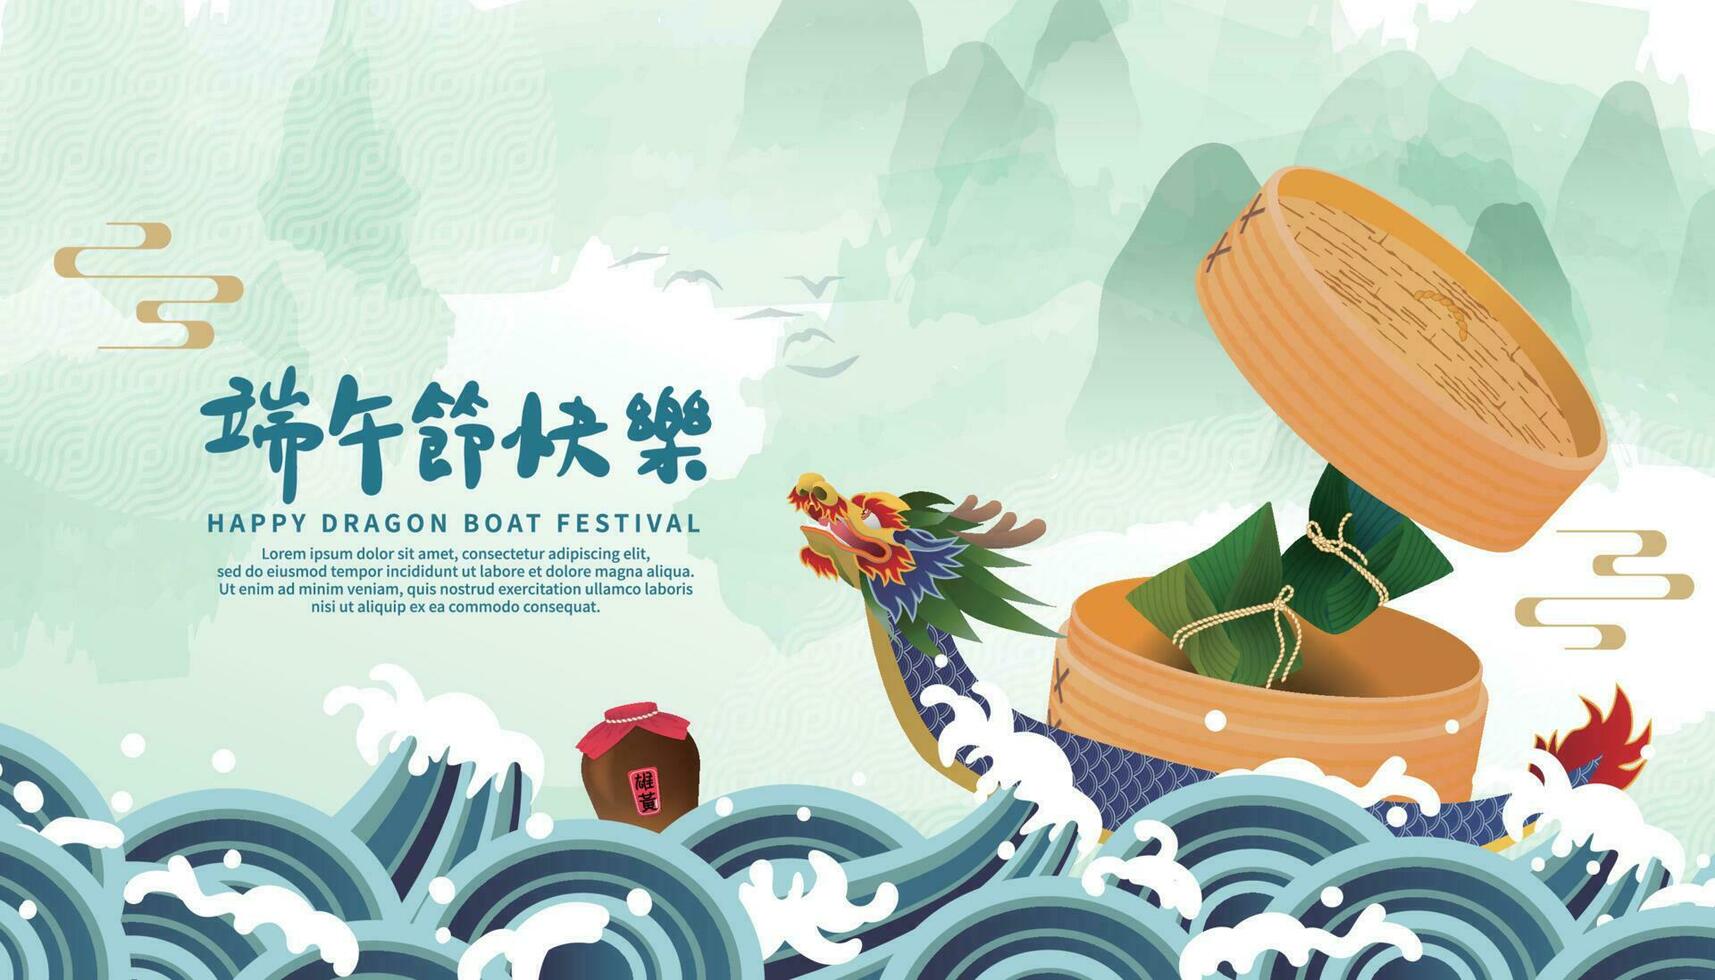 Dragon Boat Festival themed greeting card with dragon boat and rice dumplings, Chinese characters for Dragon Boat Festival wishes and realgar wine vector